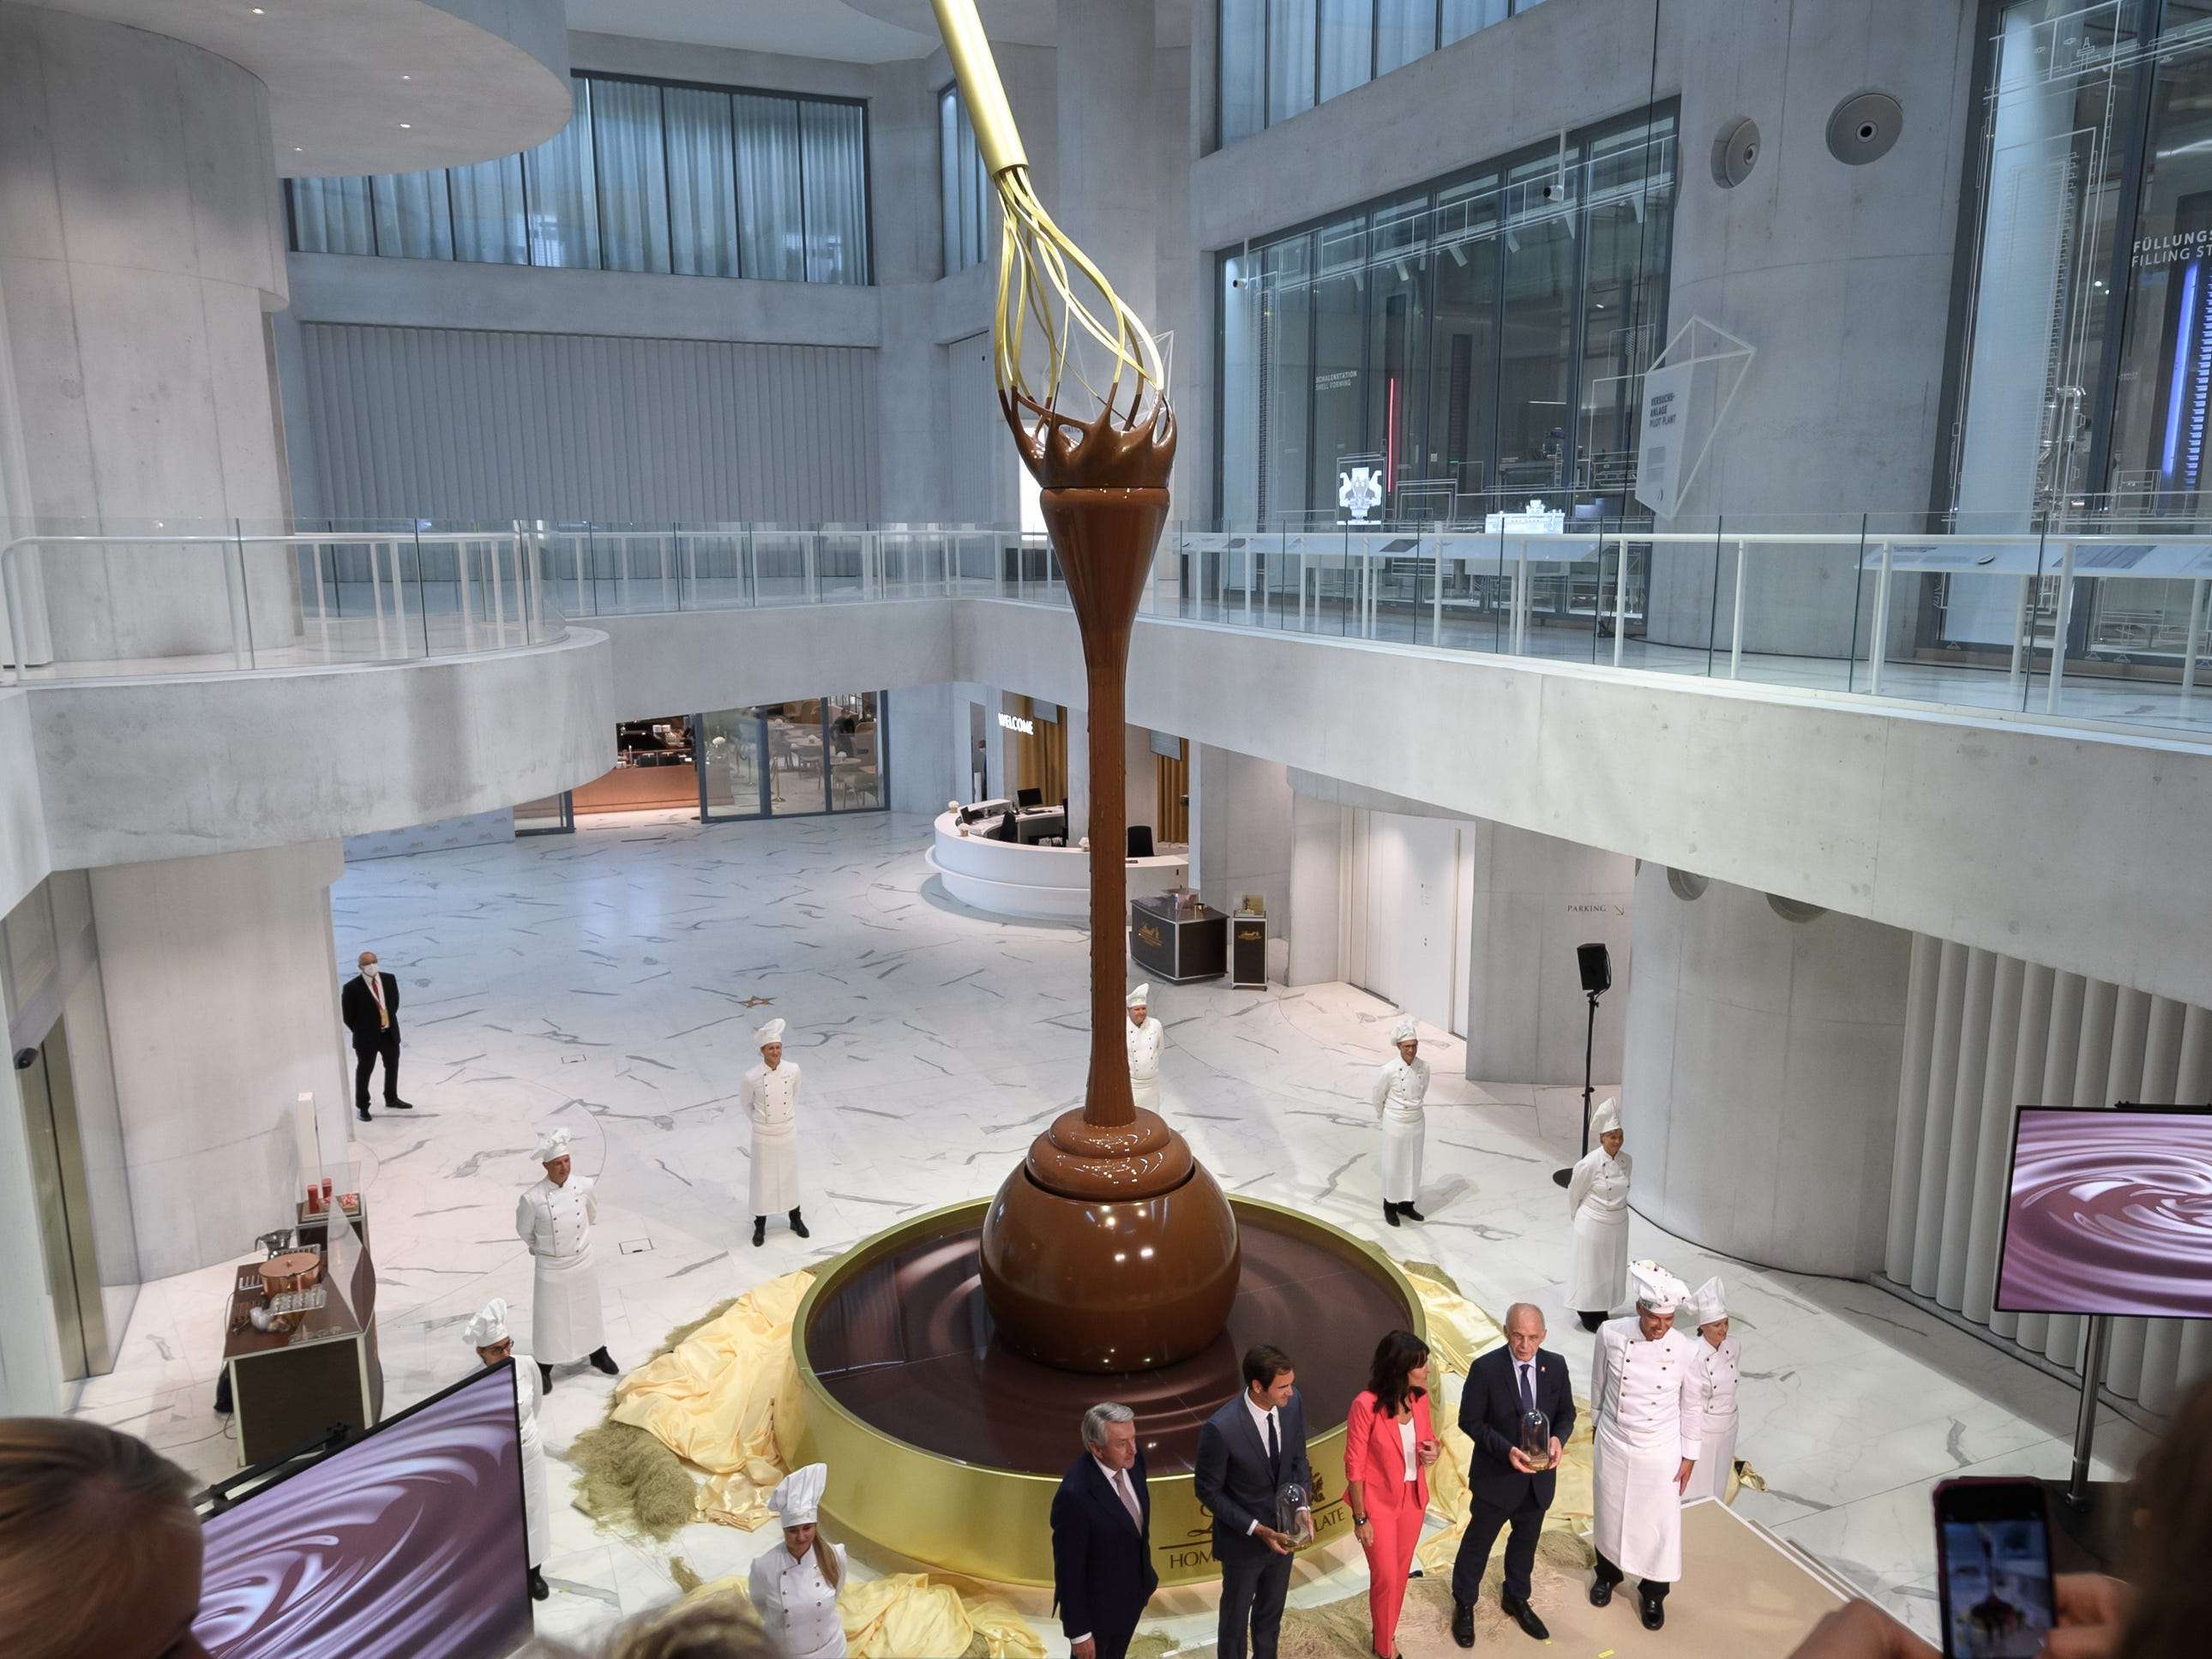 The world's largest chocolate fountain pours from 30 feet ...